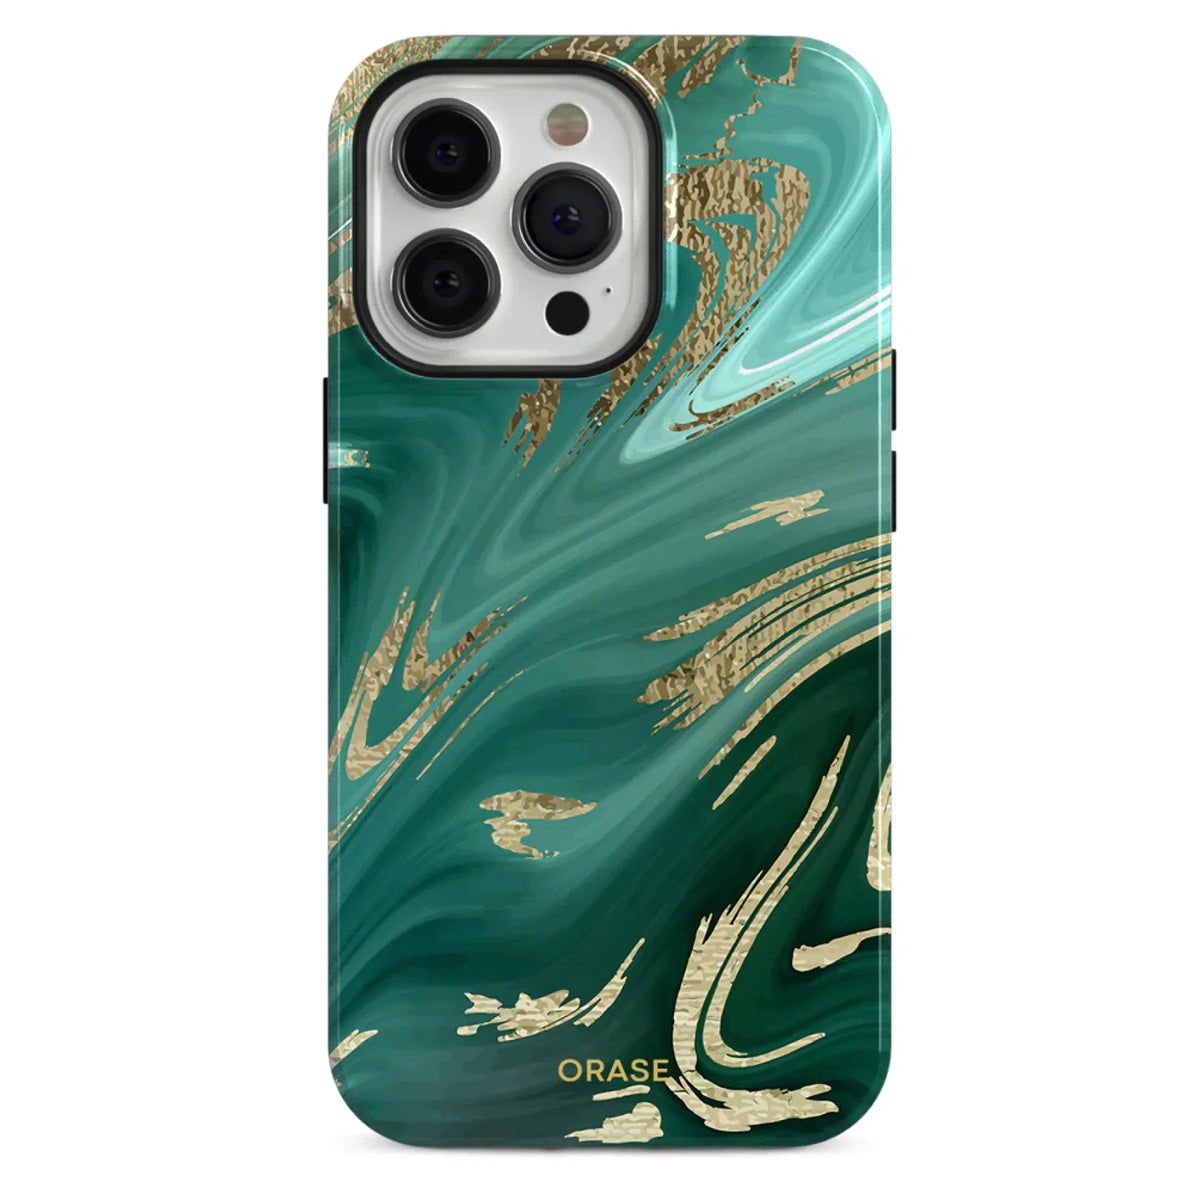 Forest Green Marble iPhone Case - iPhone 11 Pro Max